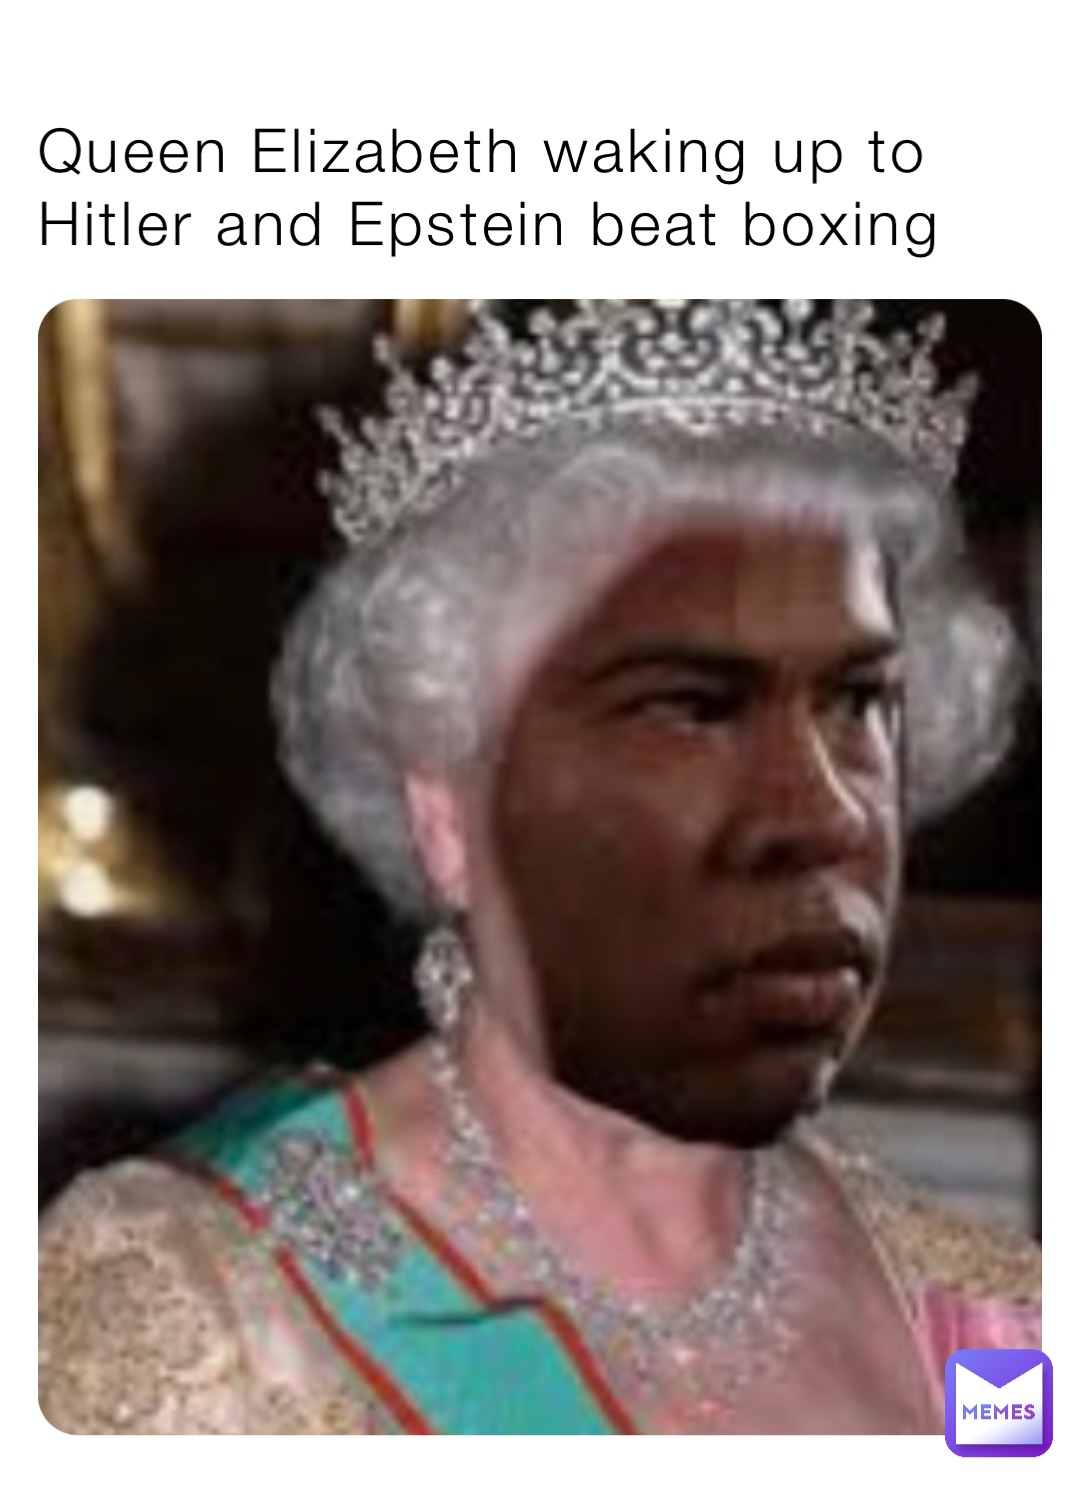 Queen Elizabeth waking up to Hitler and Epstein beat boxing